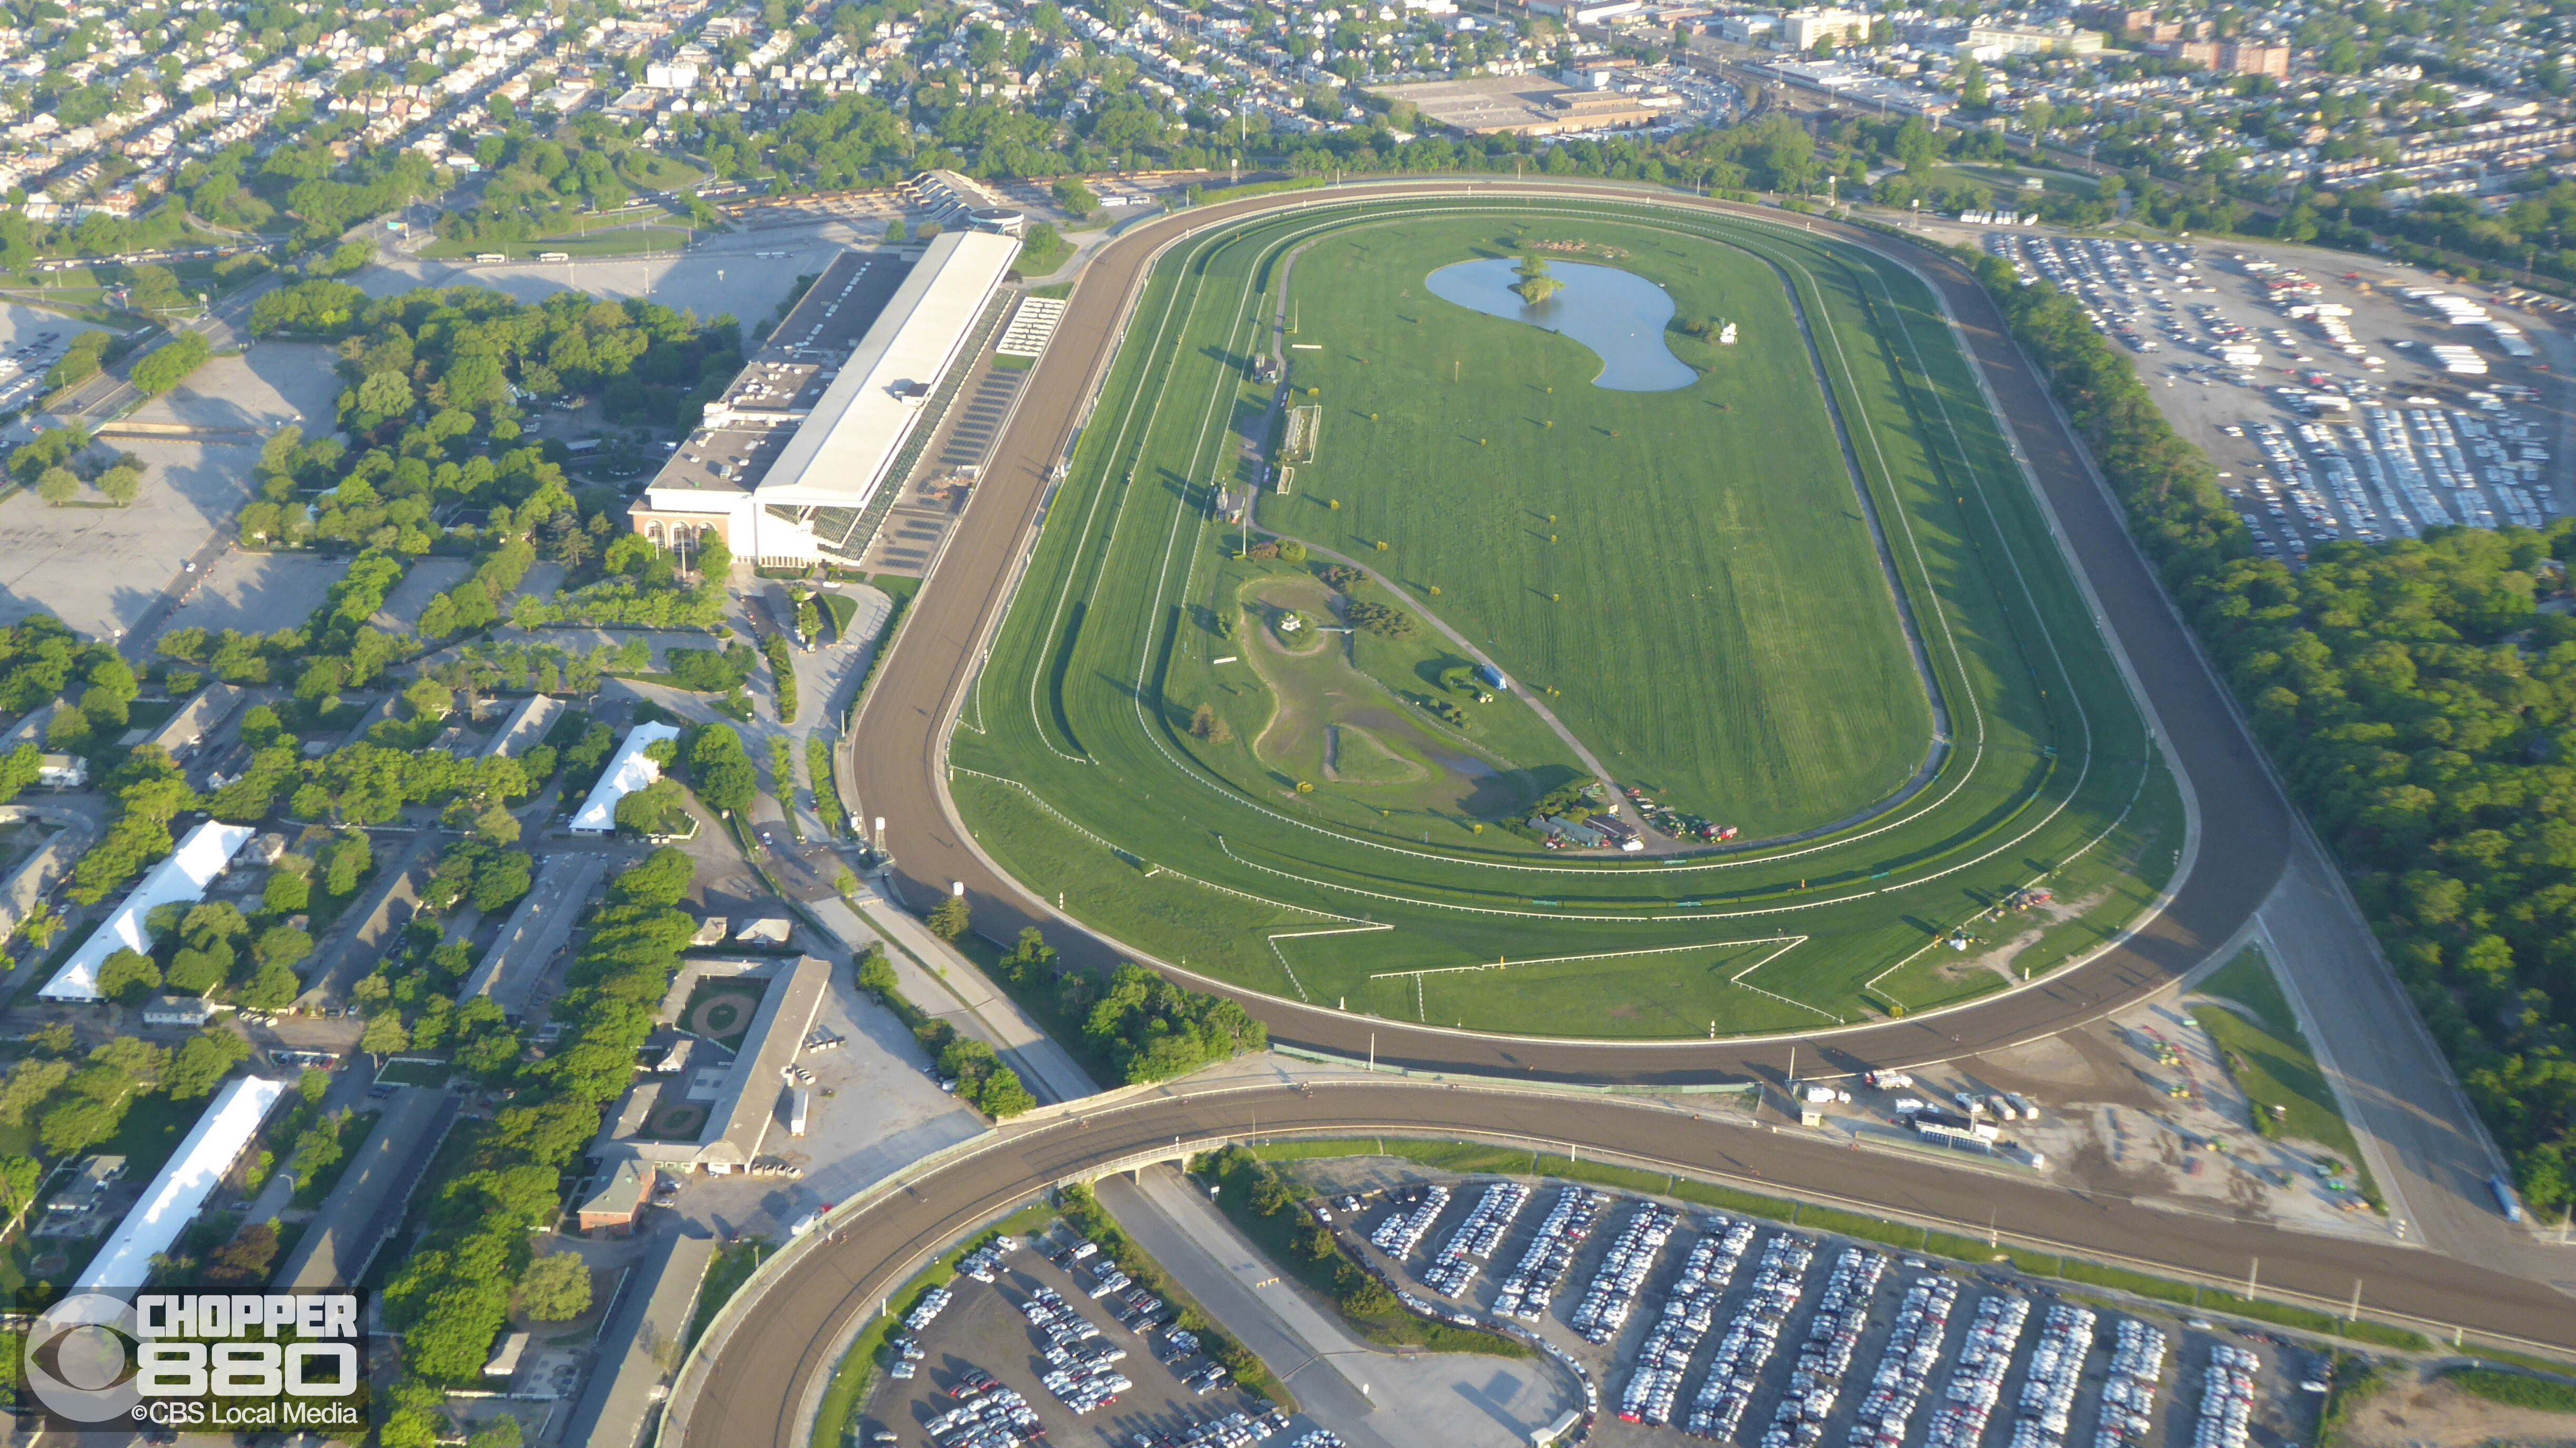 Belmont Park as seen from Chopper 880 on May 20, 2014 (Credit: Tom Kaminski/WCBS 880) 